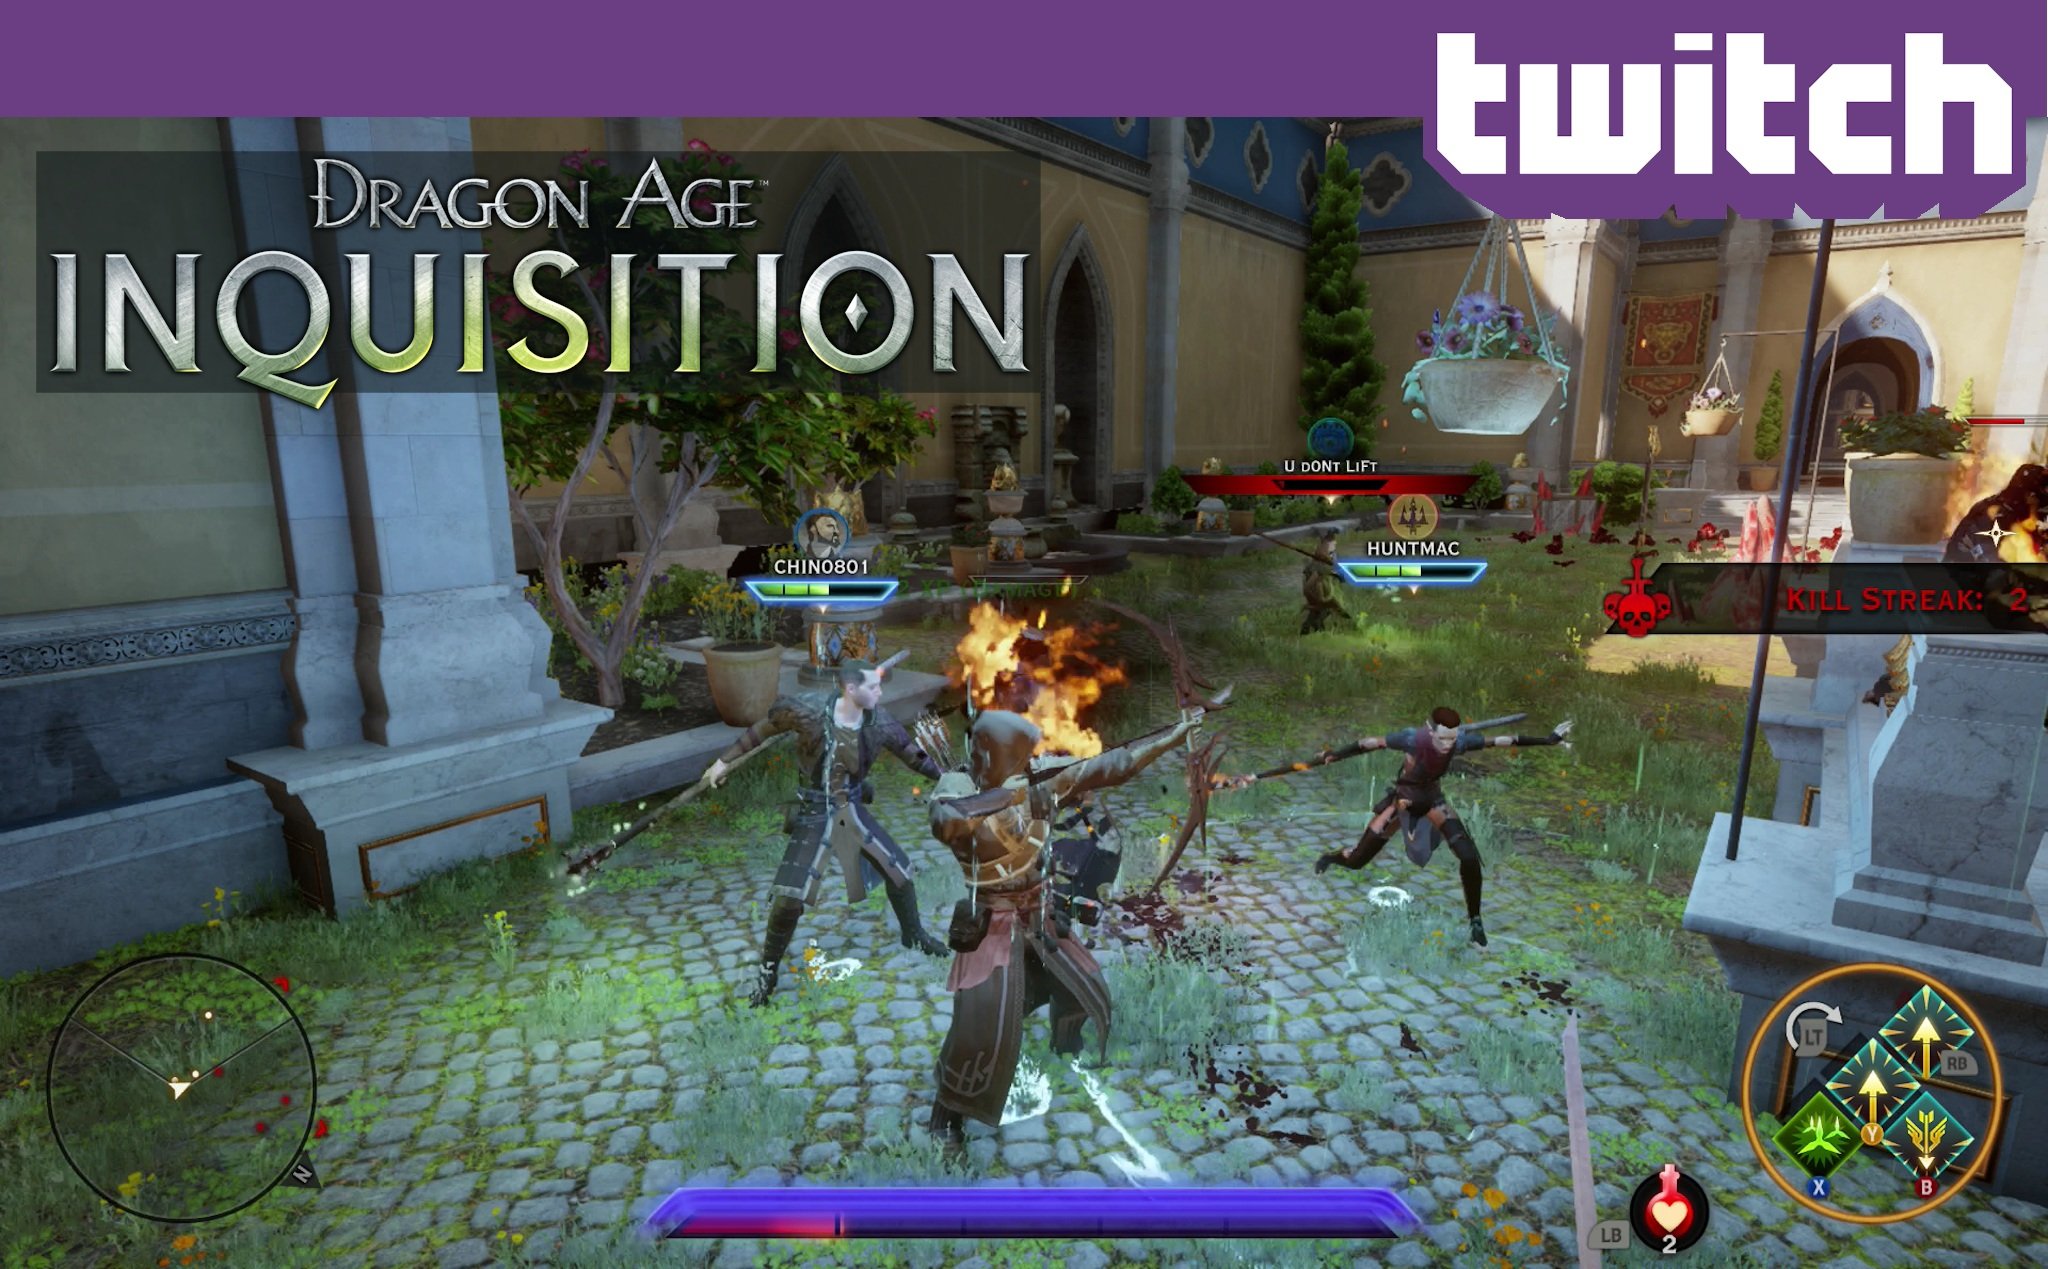 Dragon-Age-Inquisition-Multiplayer-Twitch.jpg